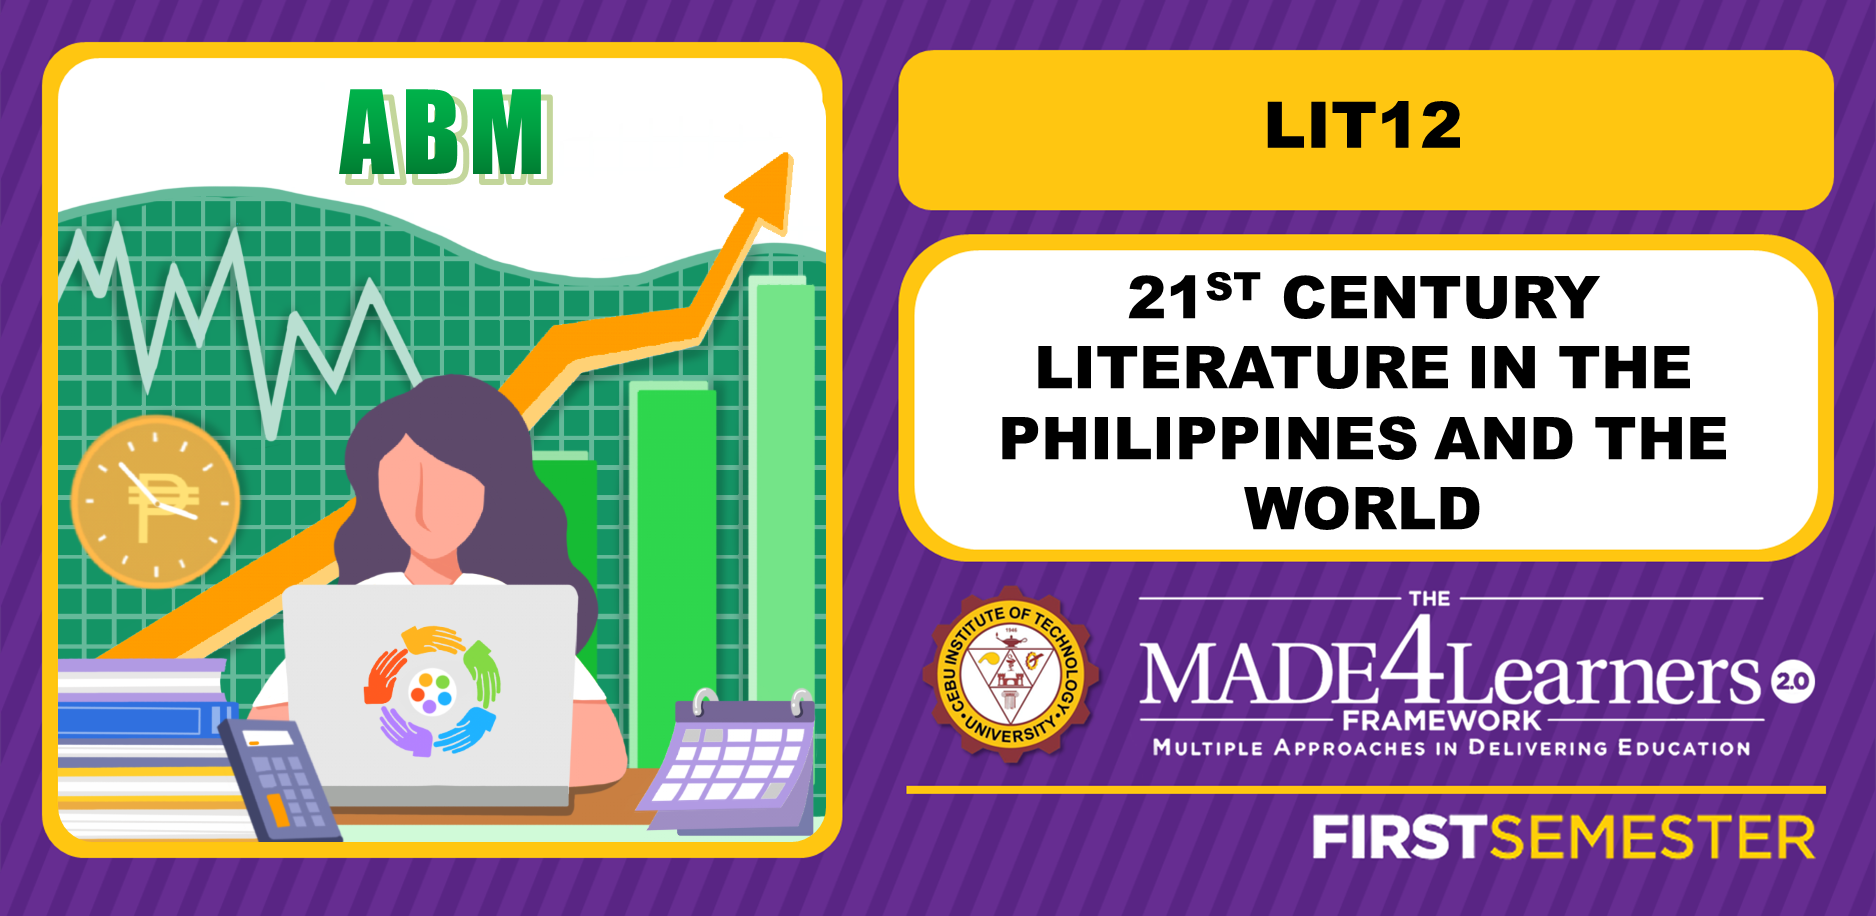 LIT12: 21st Century Literature from the Philippines and the World